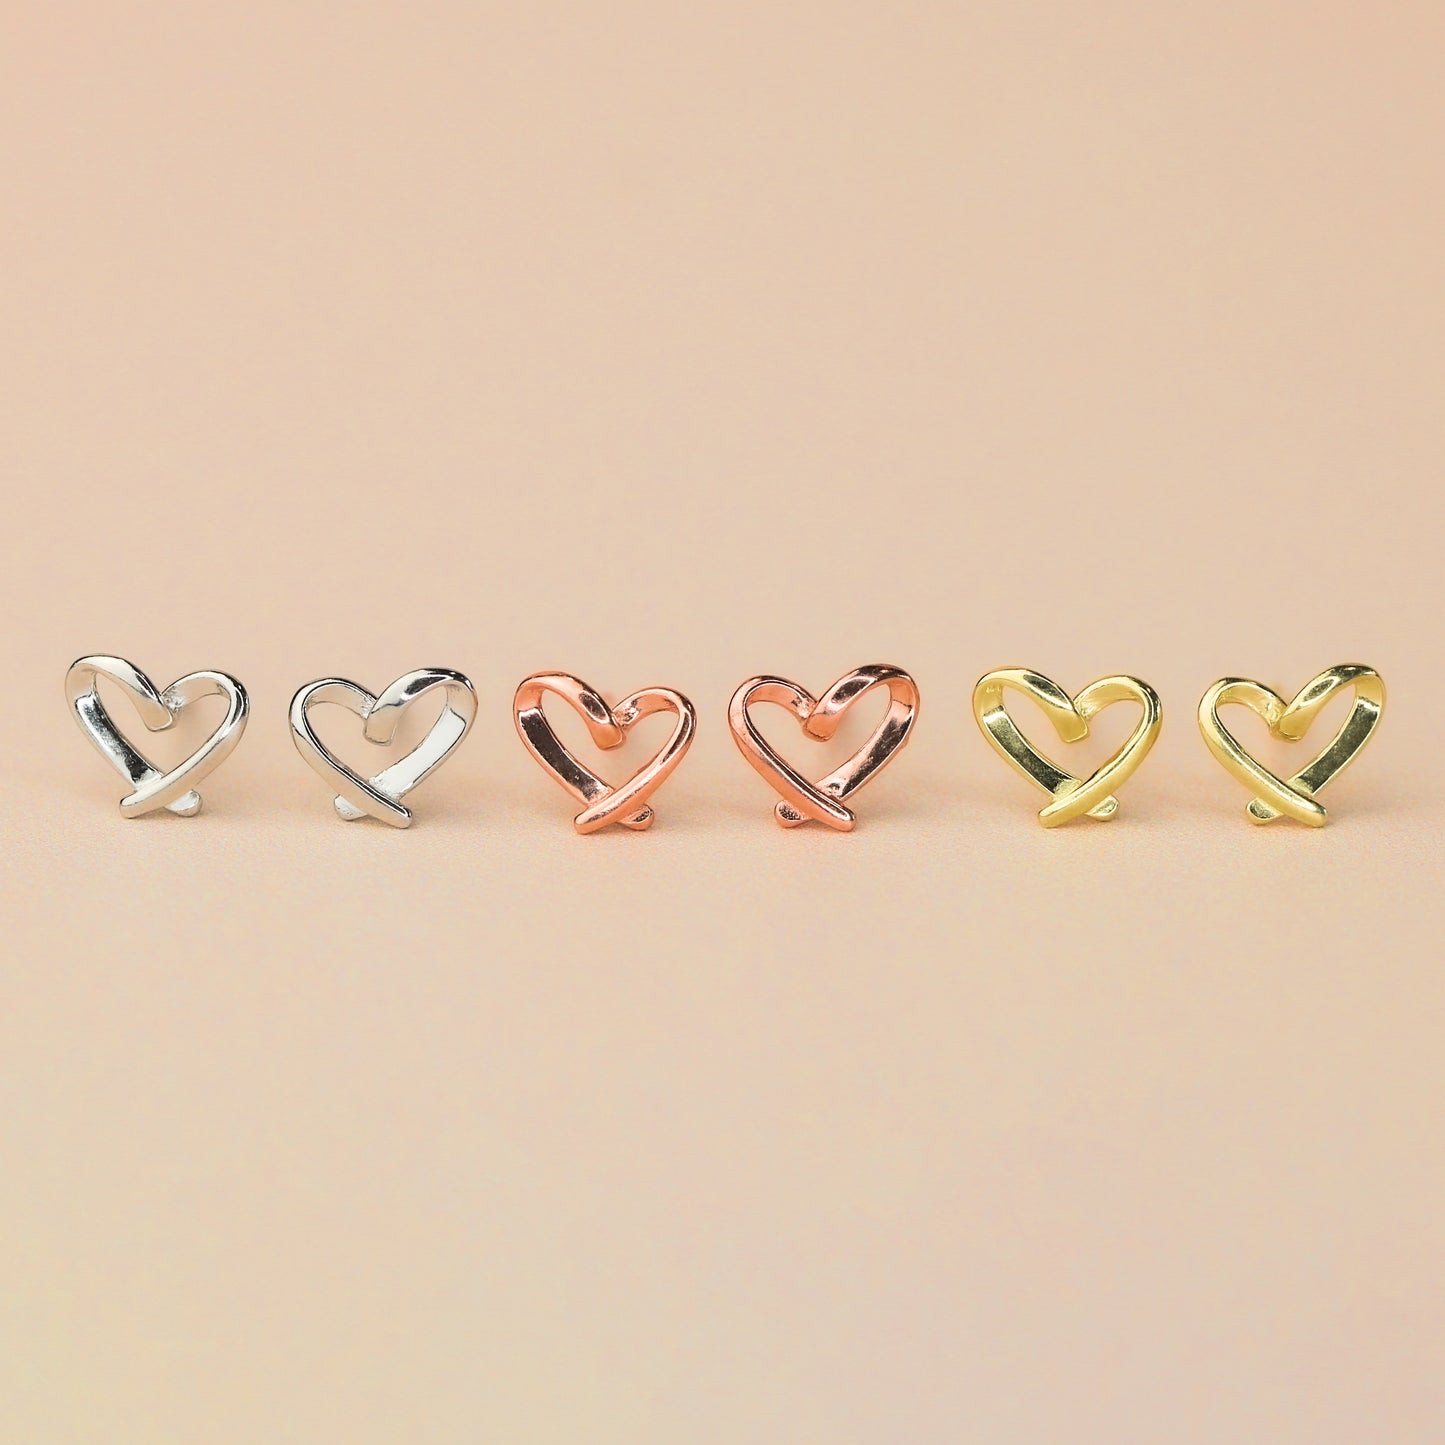 Three pairs of heart stud earrings, in silver, gold and rose gold colour